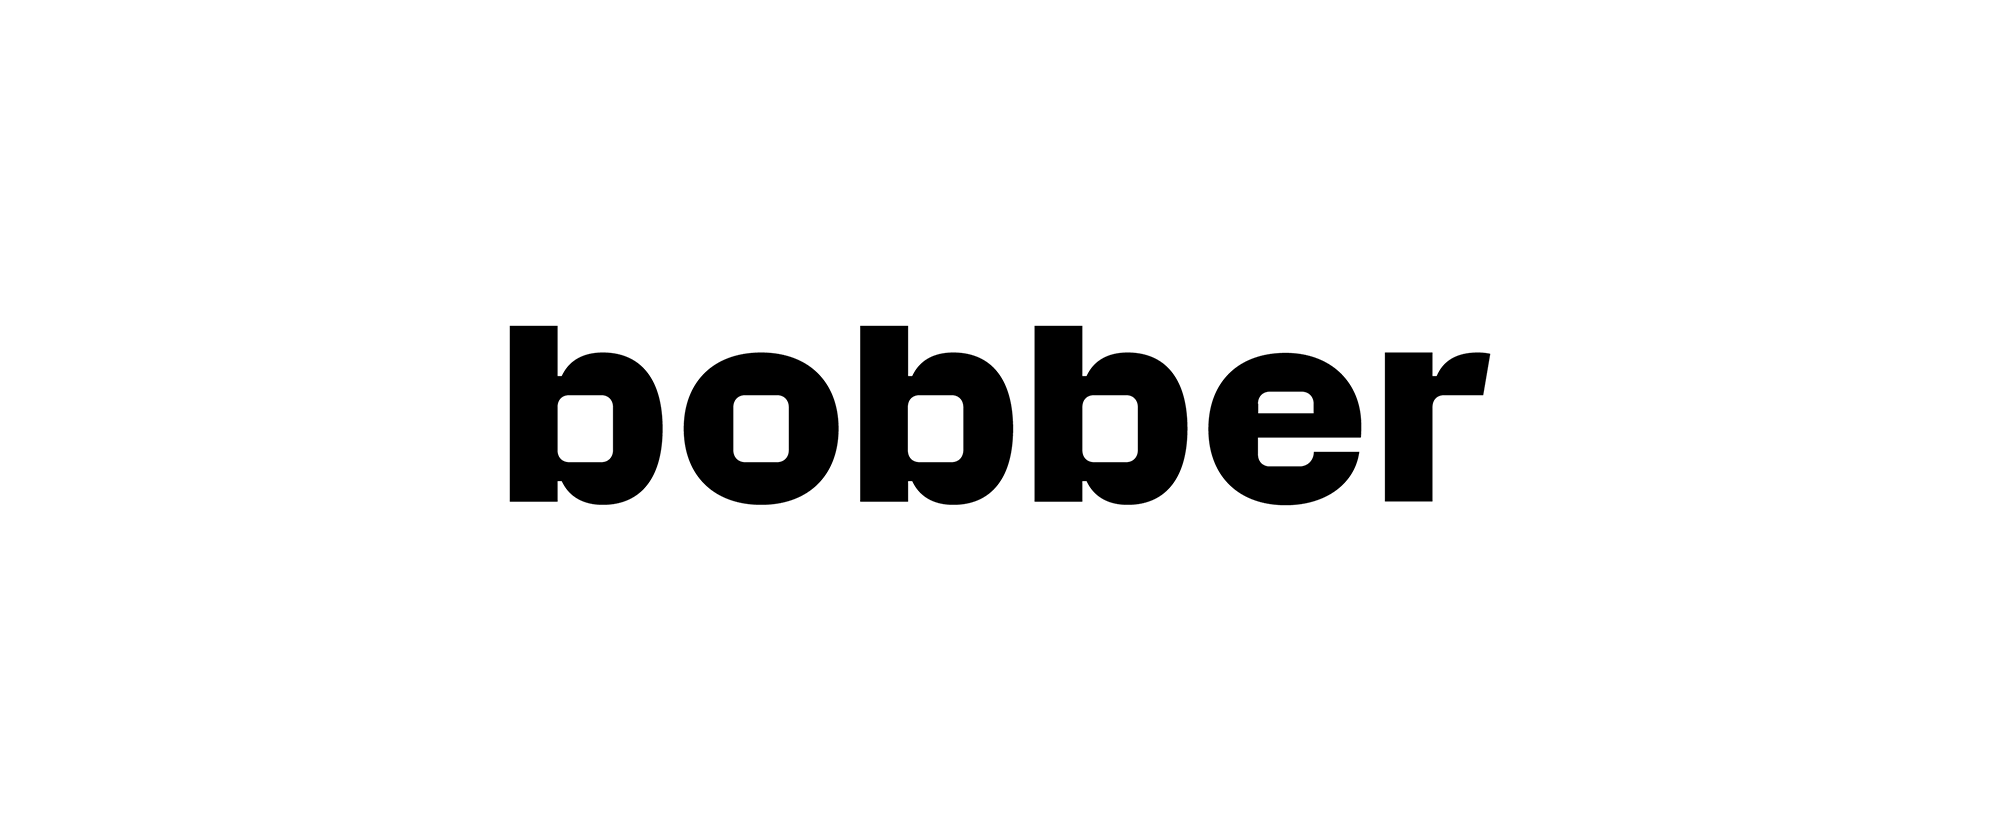 New Logo and Packaging for Bobber by Sulliwan